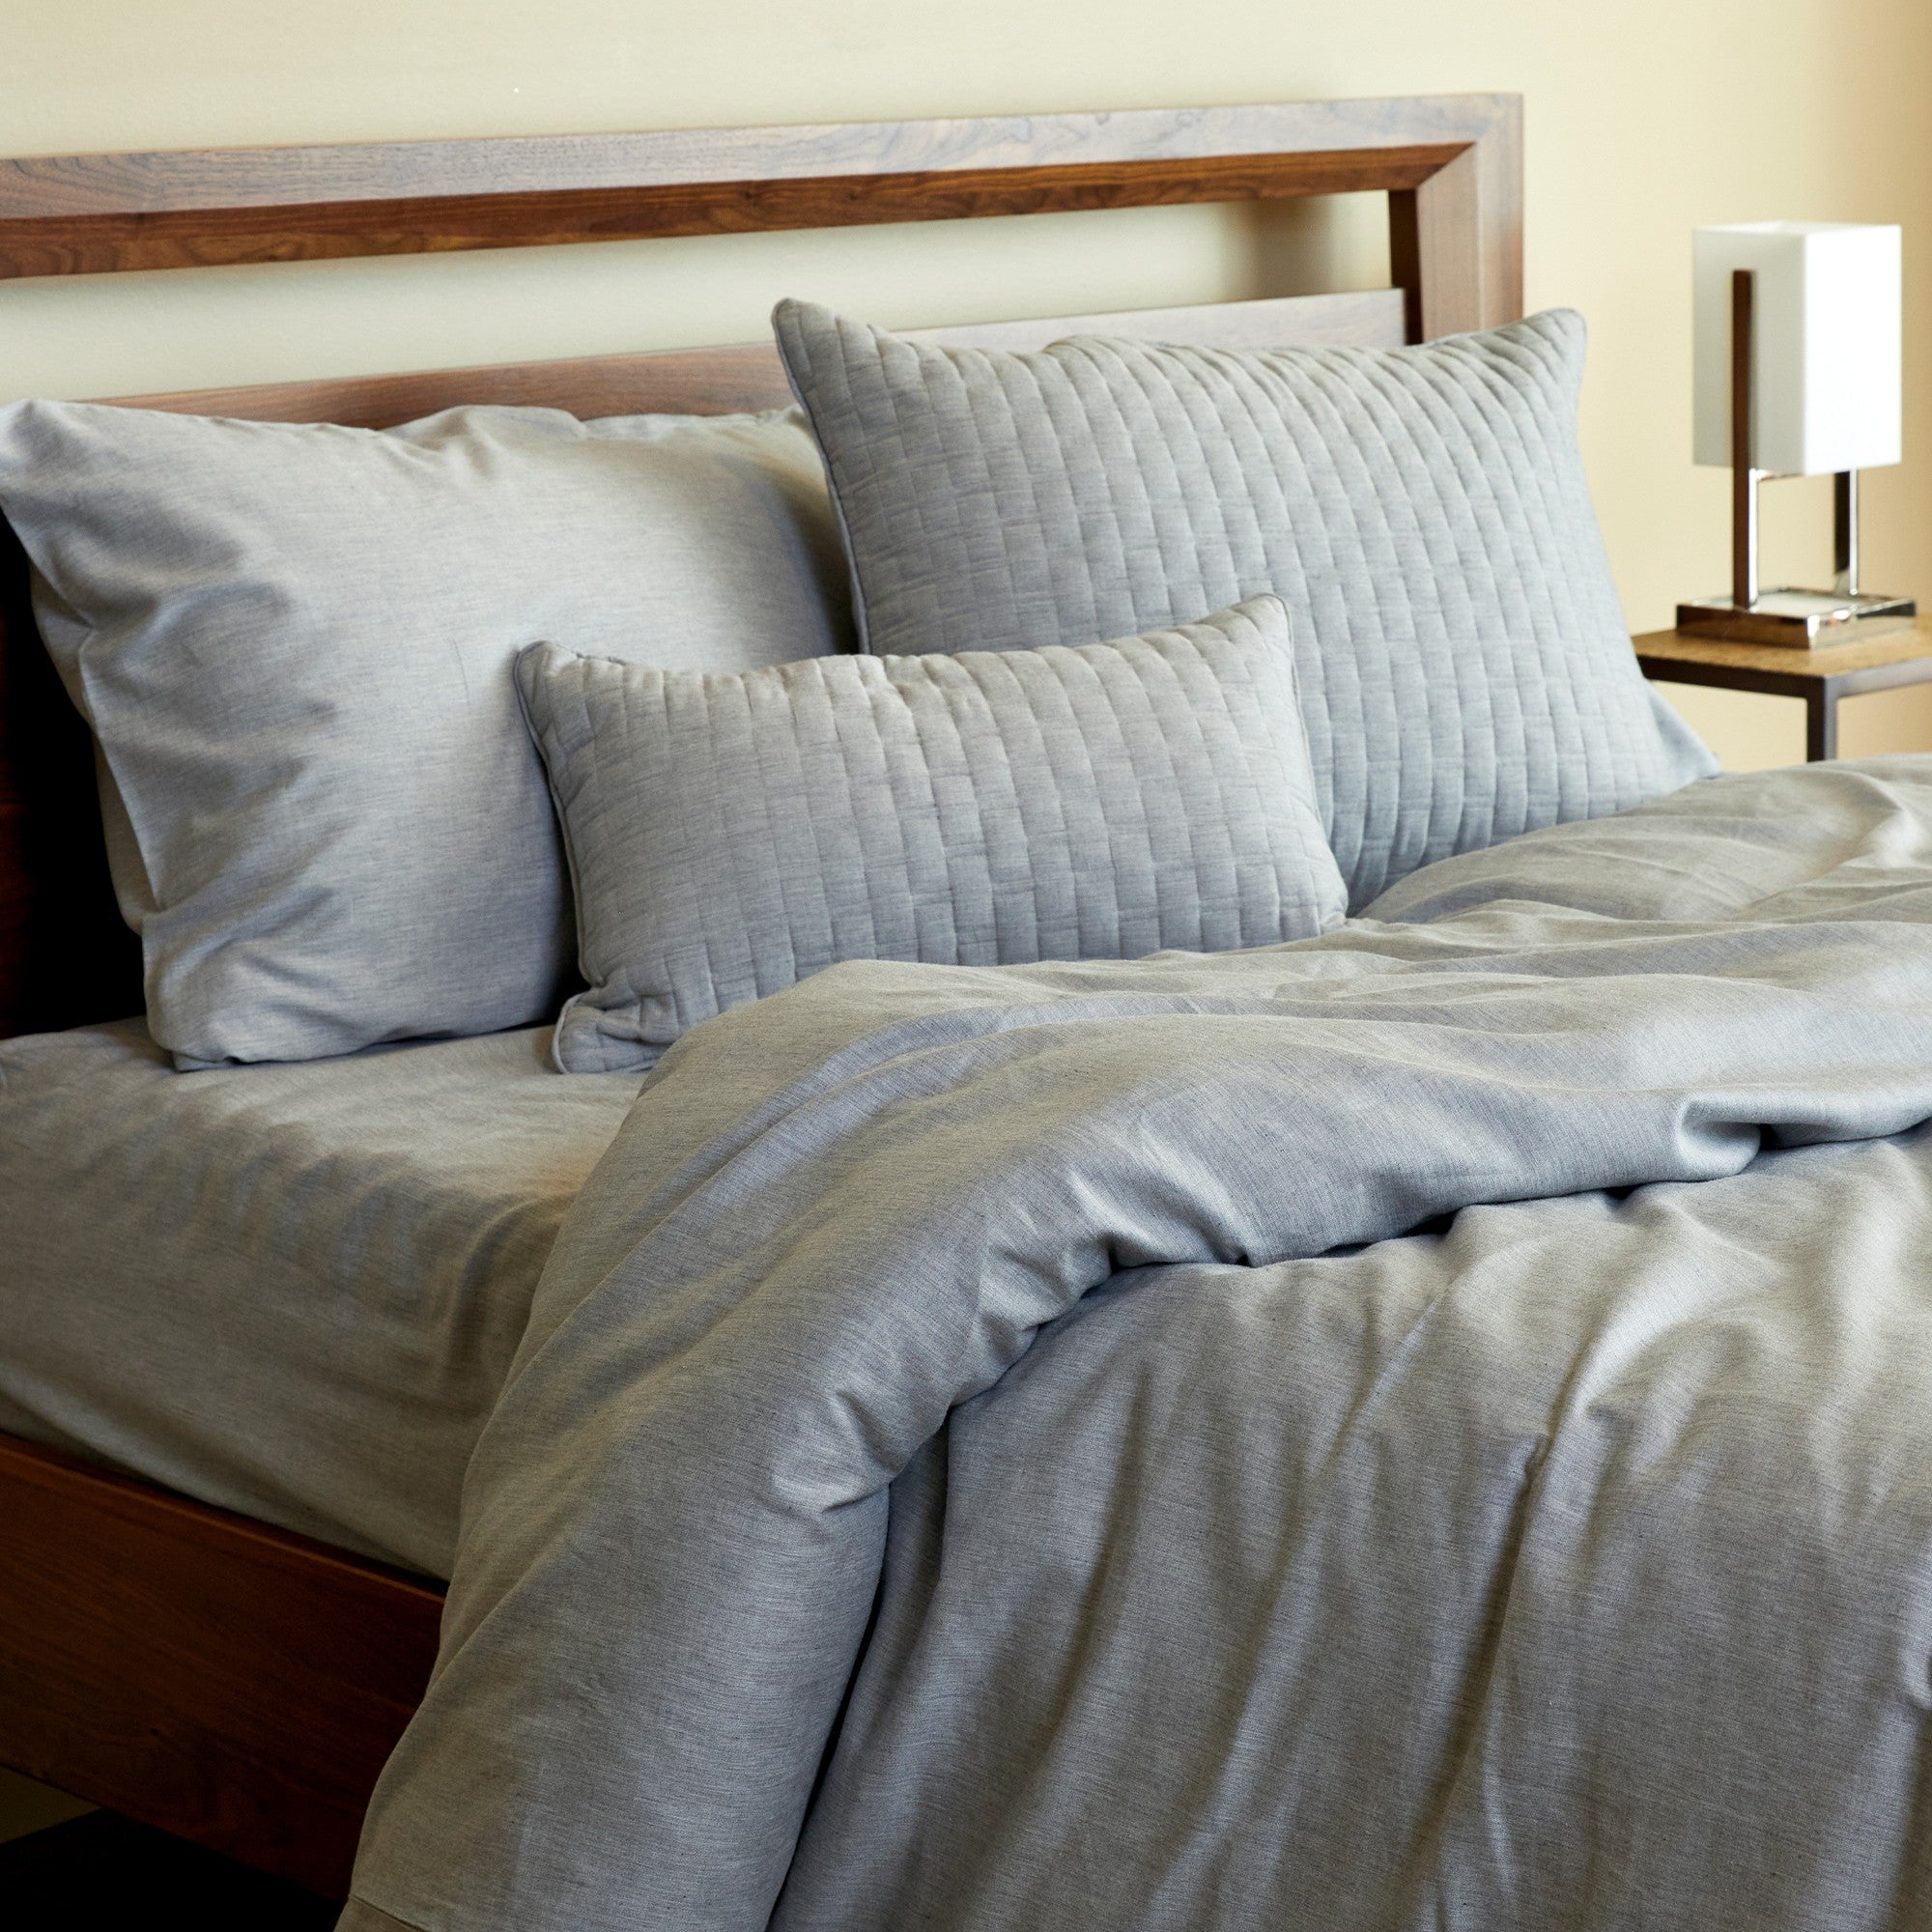 silver gray melange bamboo duvet dover and pillows on a made bed